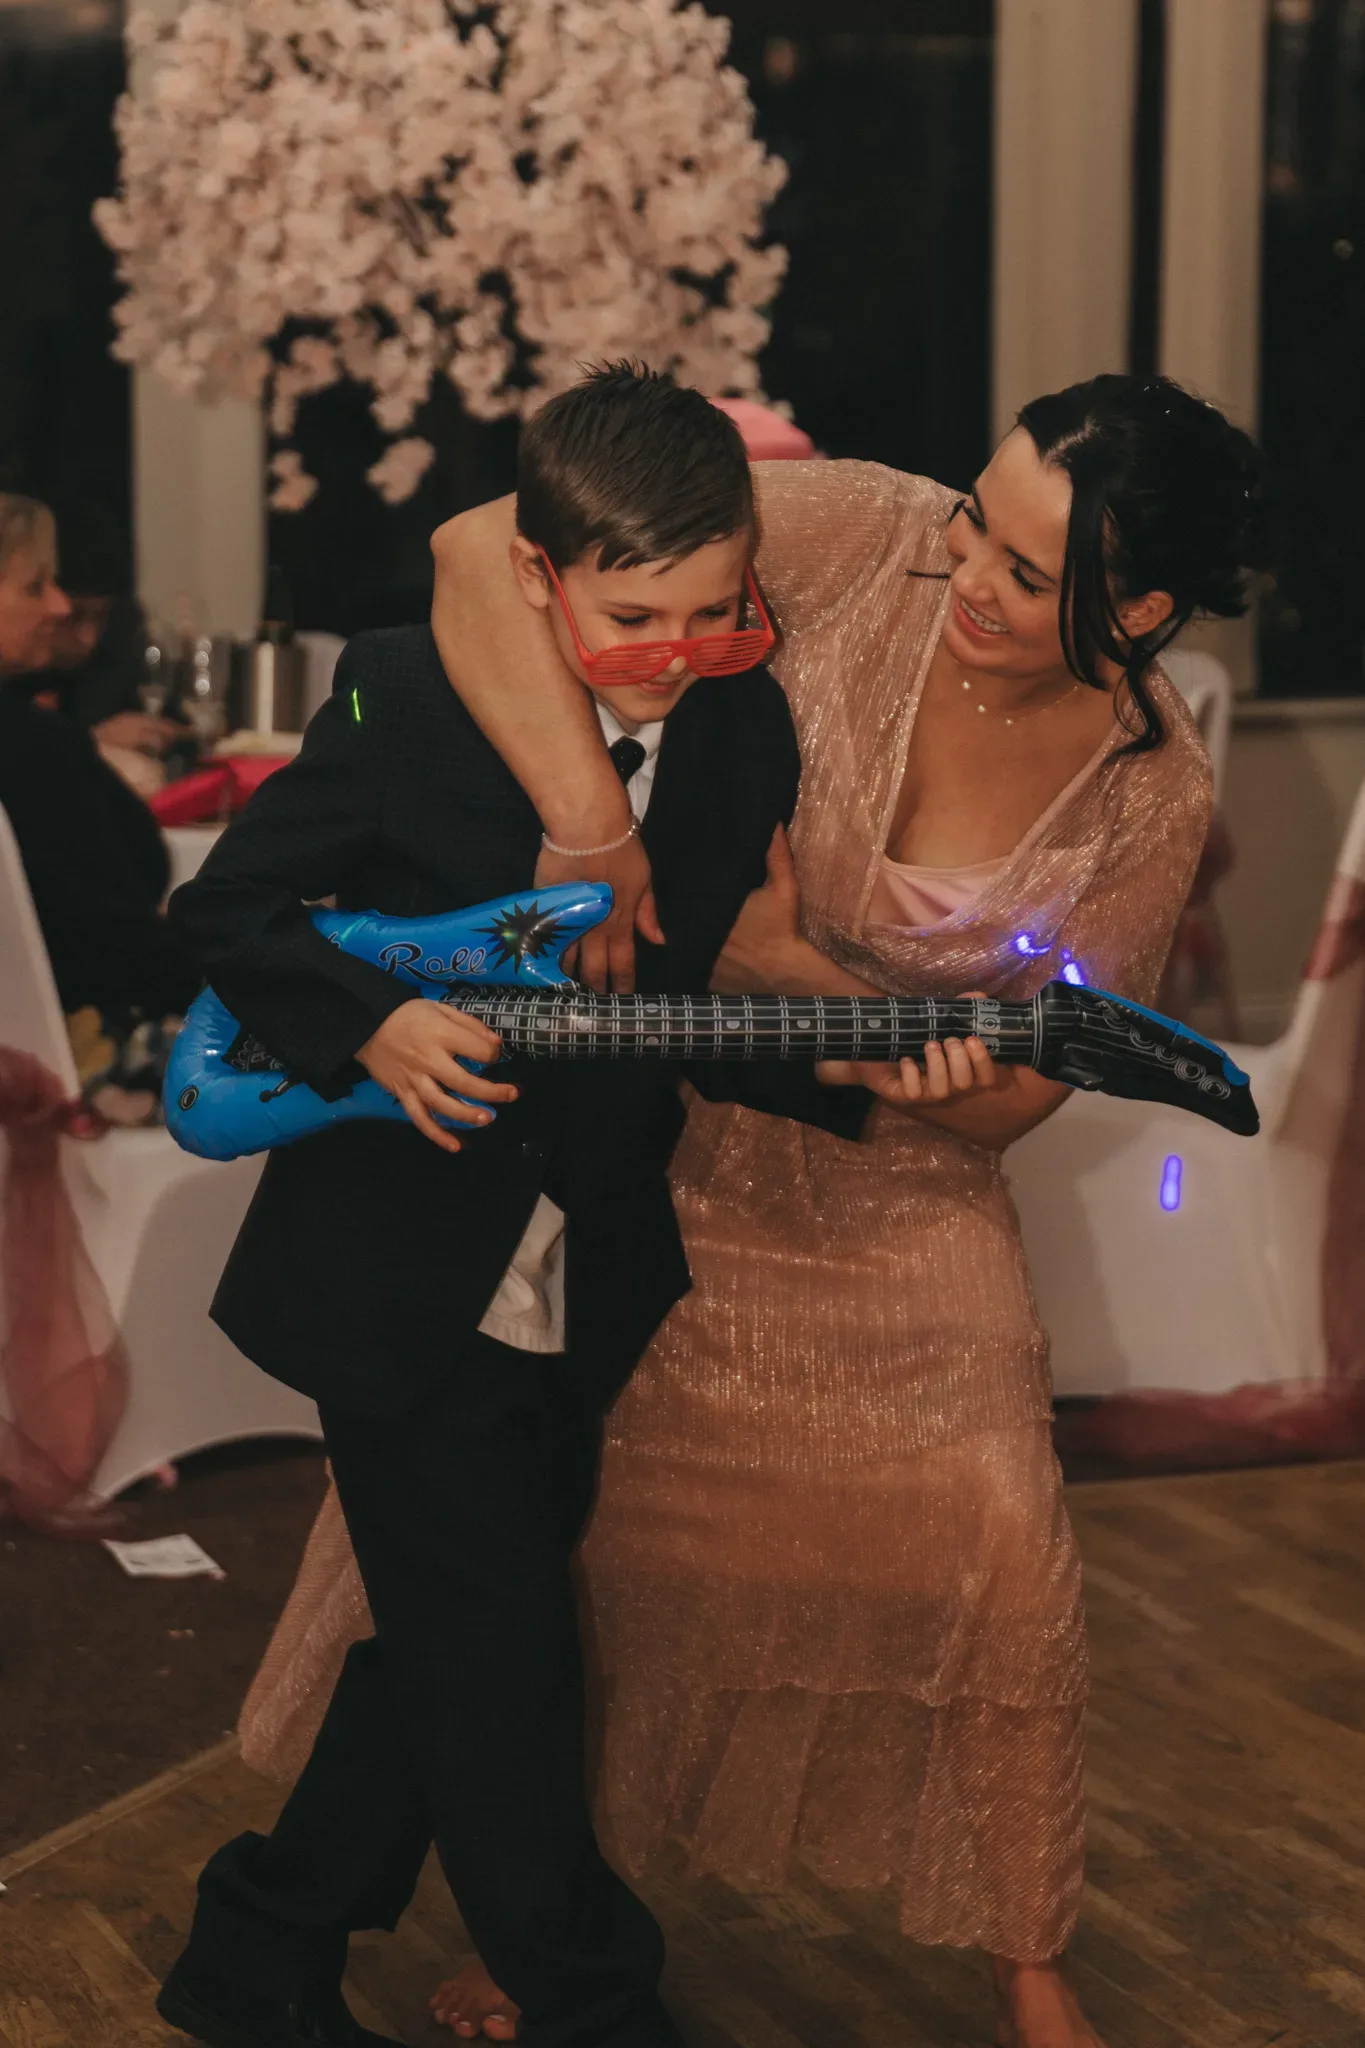 A woman and a young boy laugh together at a party, with the boy playfully pretending to play a blue toy guitar. the woman, dressed in a shimmering long dress, gently adjusts his suit jacket. elegant decor and seated guests in the background.